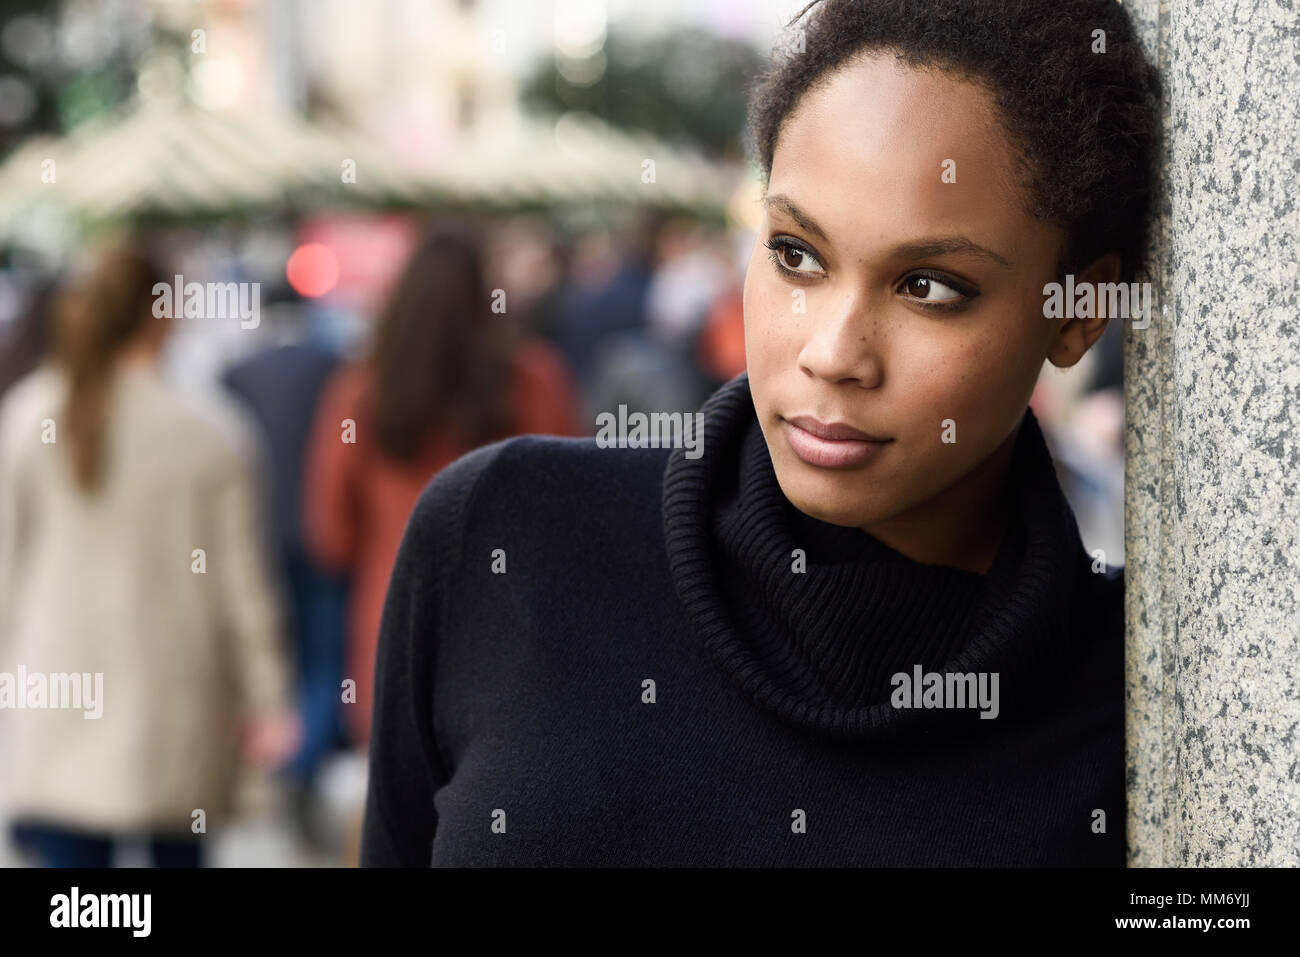 Young black female standing in an urban street. Mixed woman wearing poloneck sweater and skirt. Stock Photo